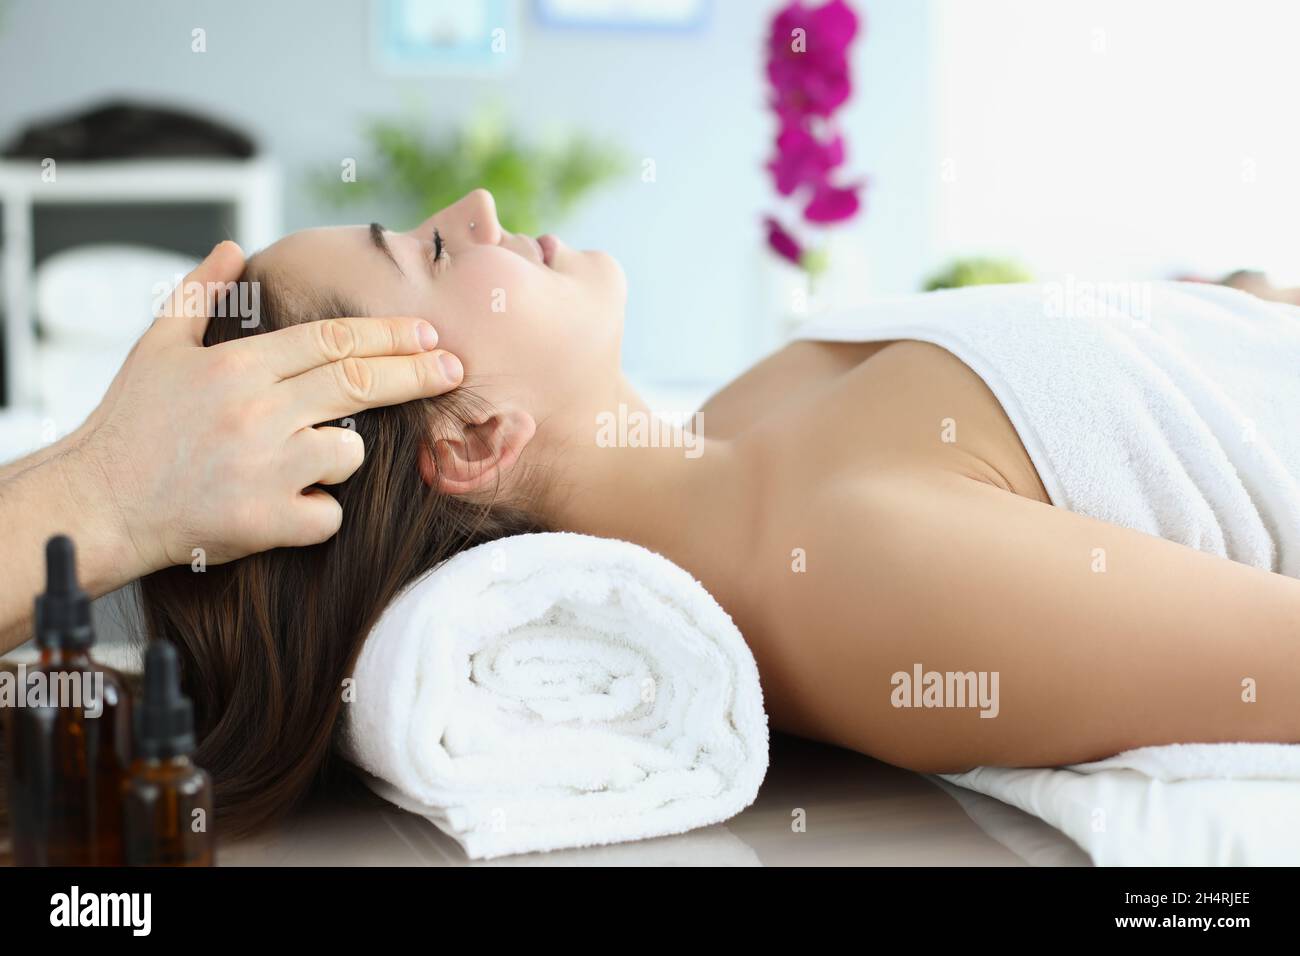 Close-uo of beautiful woman getting face massage in luxury spa, masseuse hands massaging girl with closed eyes at resort spa. Wellness, care, beauty t Stock Photo